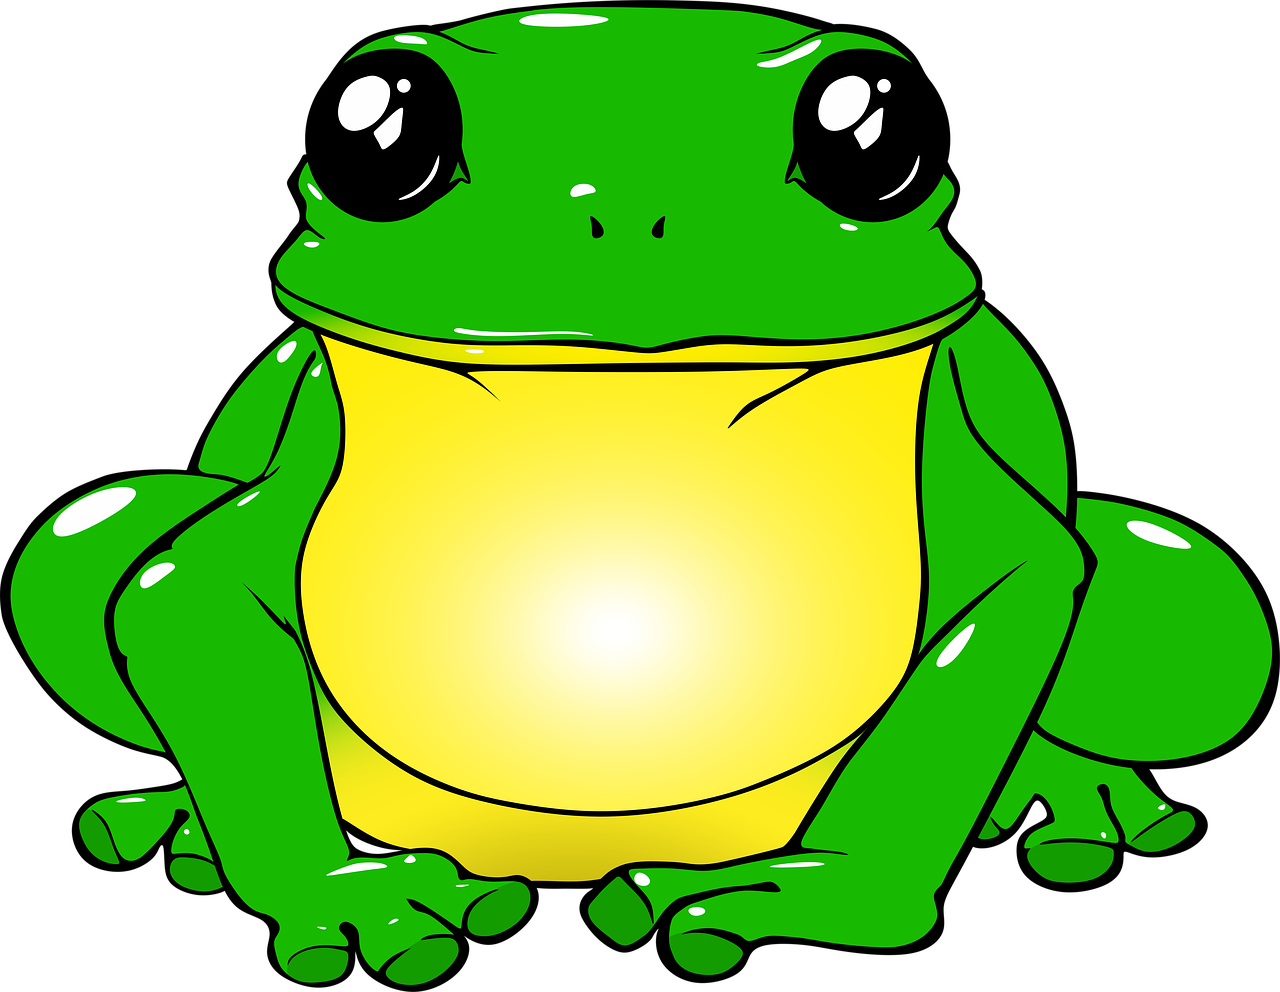 a green and yellow frog with big eyes, an illustration of, pixabay, art nouveau, glowing (((white laser))) eyes, “portrait of a cartoon animal, nigth, fat